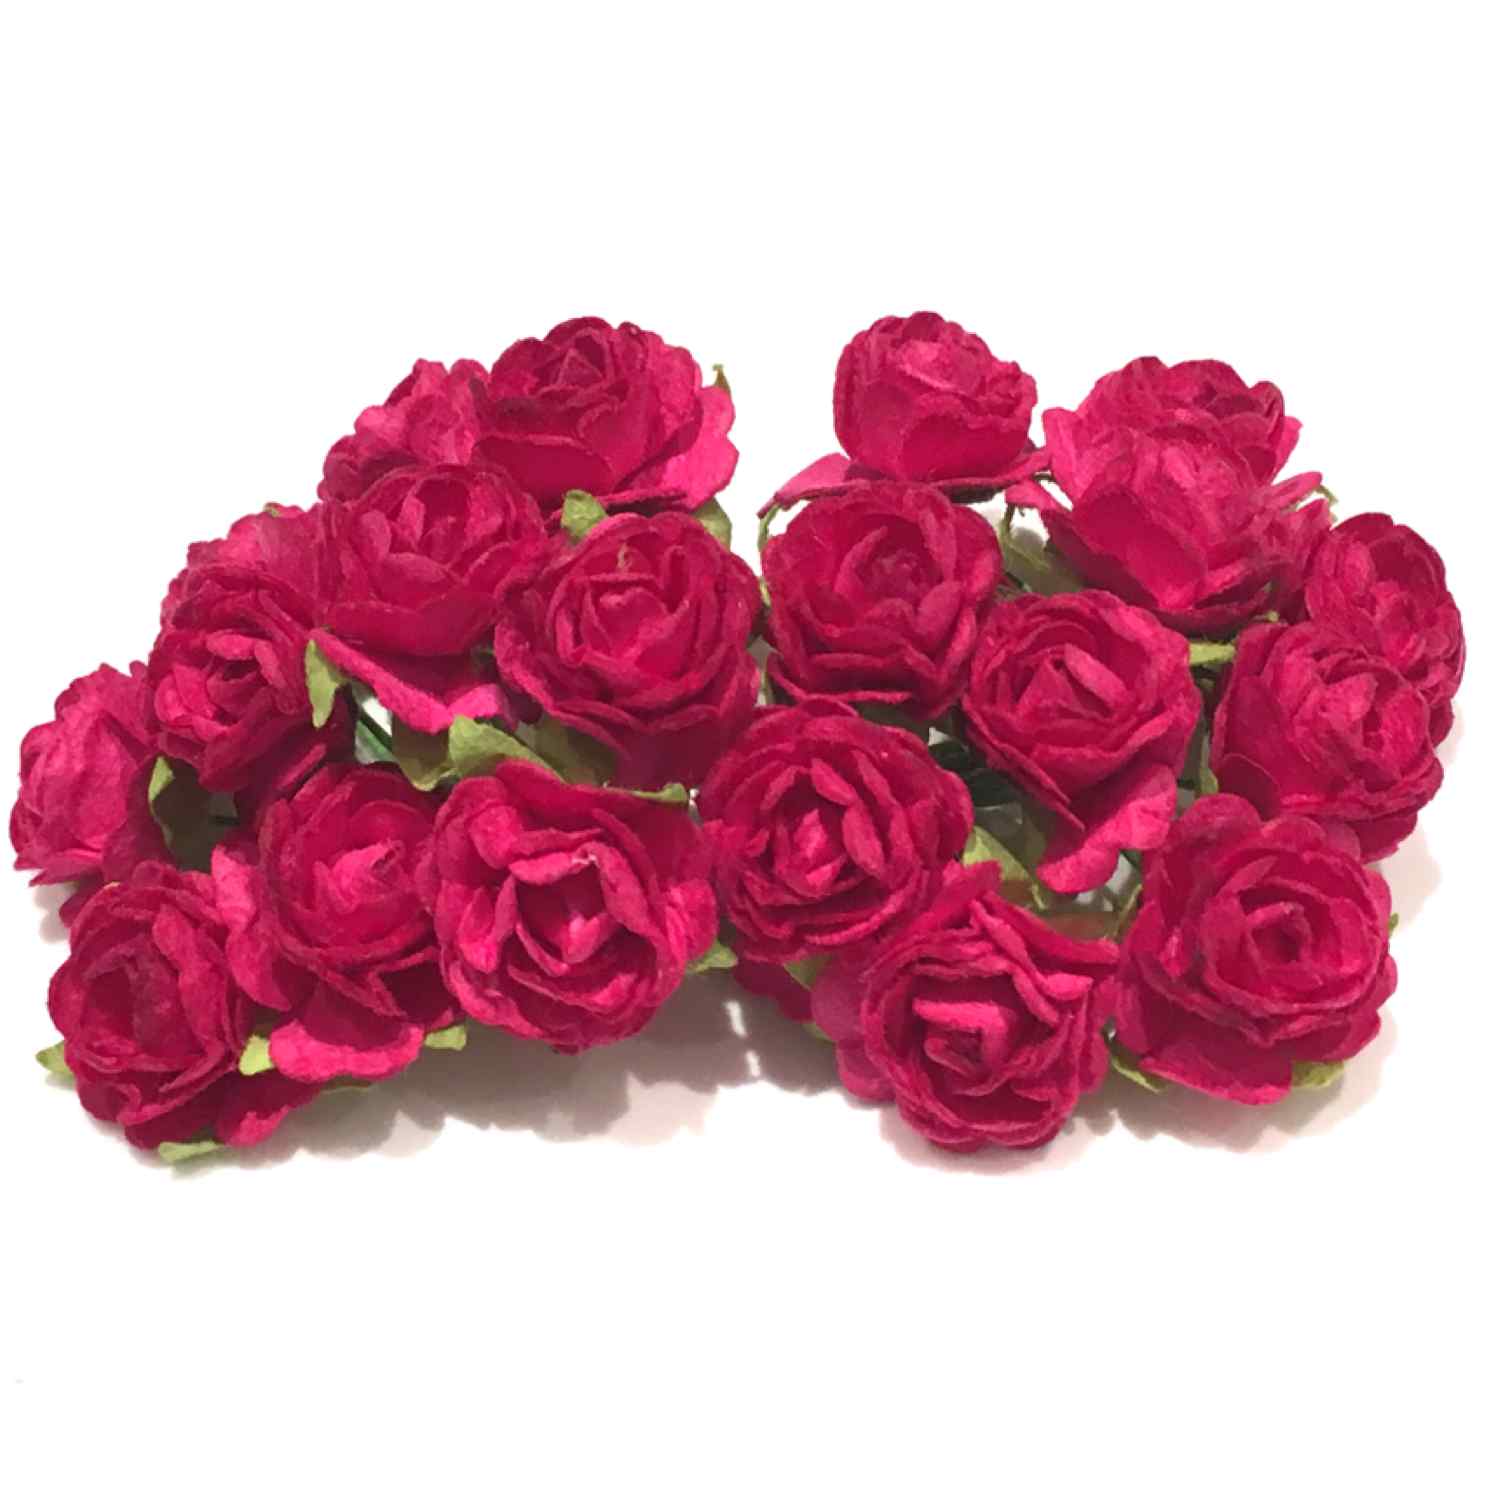 Cerise Open Mulberry Paper Roses Or088